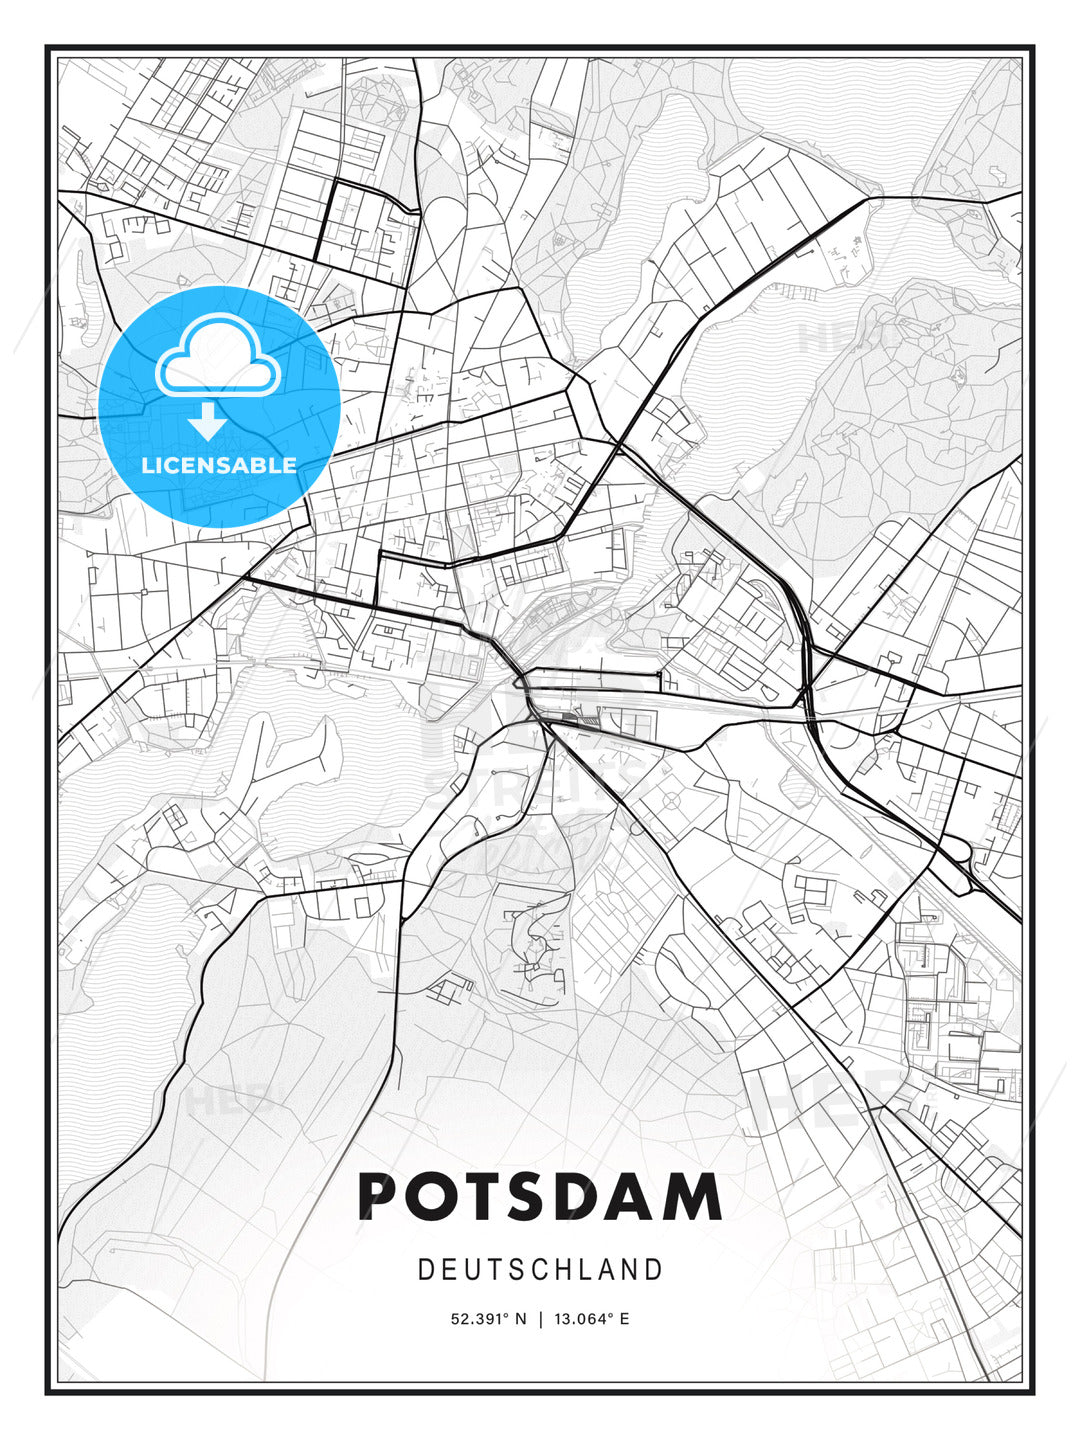 Potsdam, Germany, Modern Print Template in Various Formats - HEBSTREITS Sketches